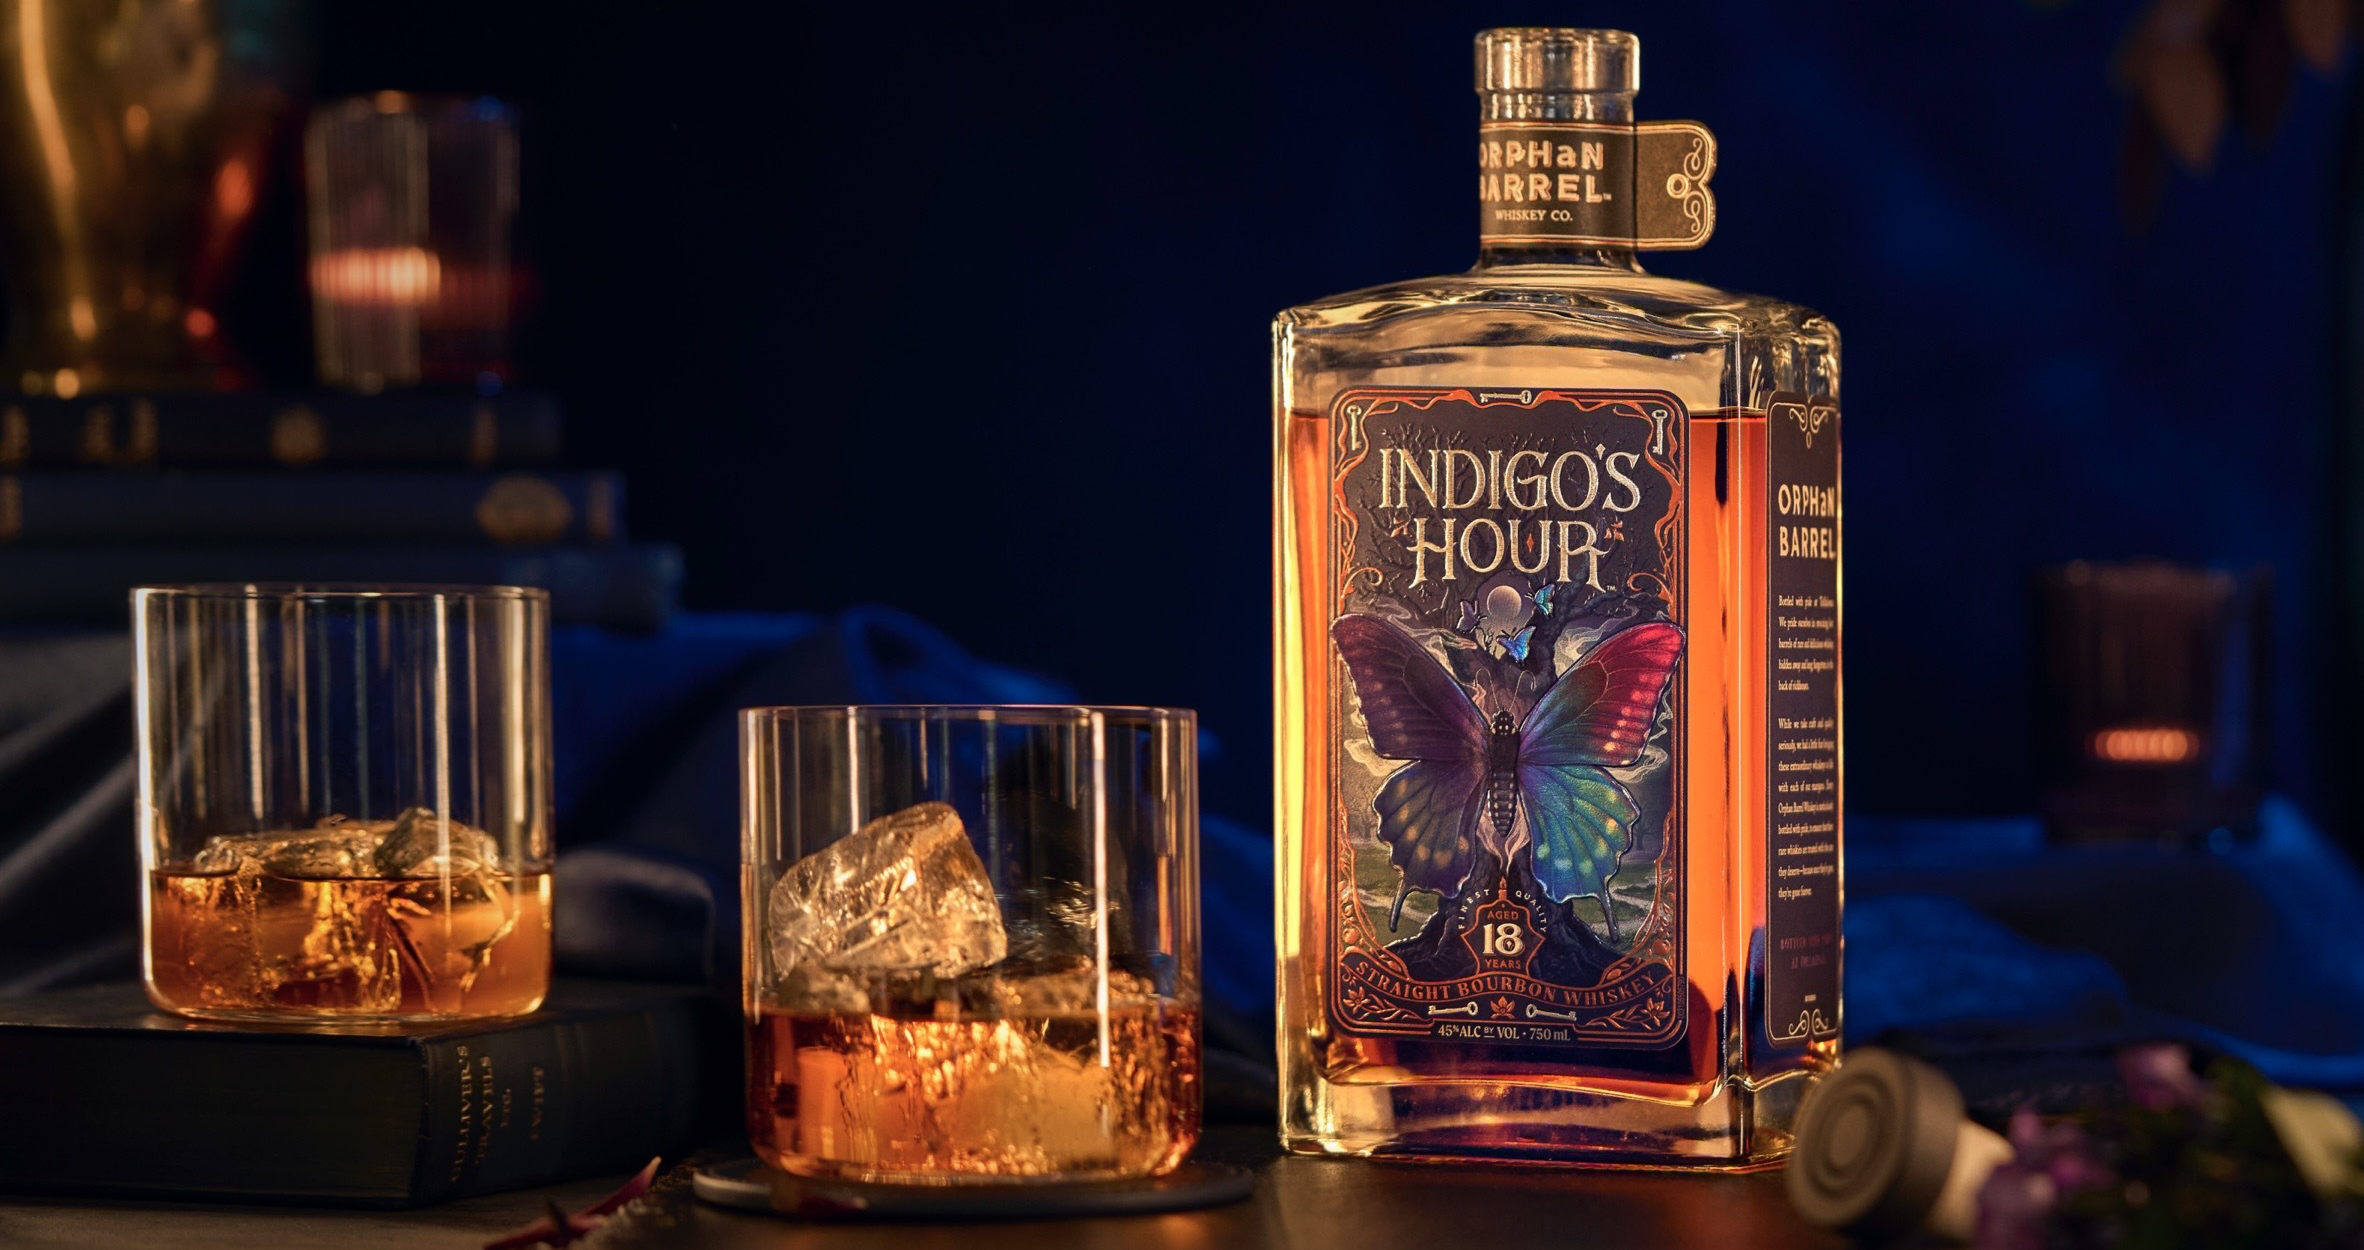 Introducing Indigo's Hour, A Rare, Limited-Edition Straight Bourbon Whiskey Transformed Through 18 Years of Barrel Aging